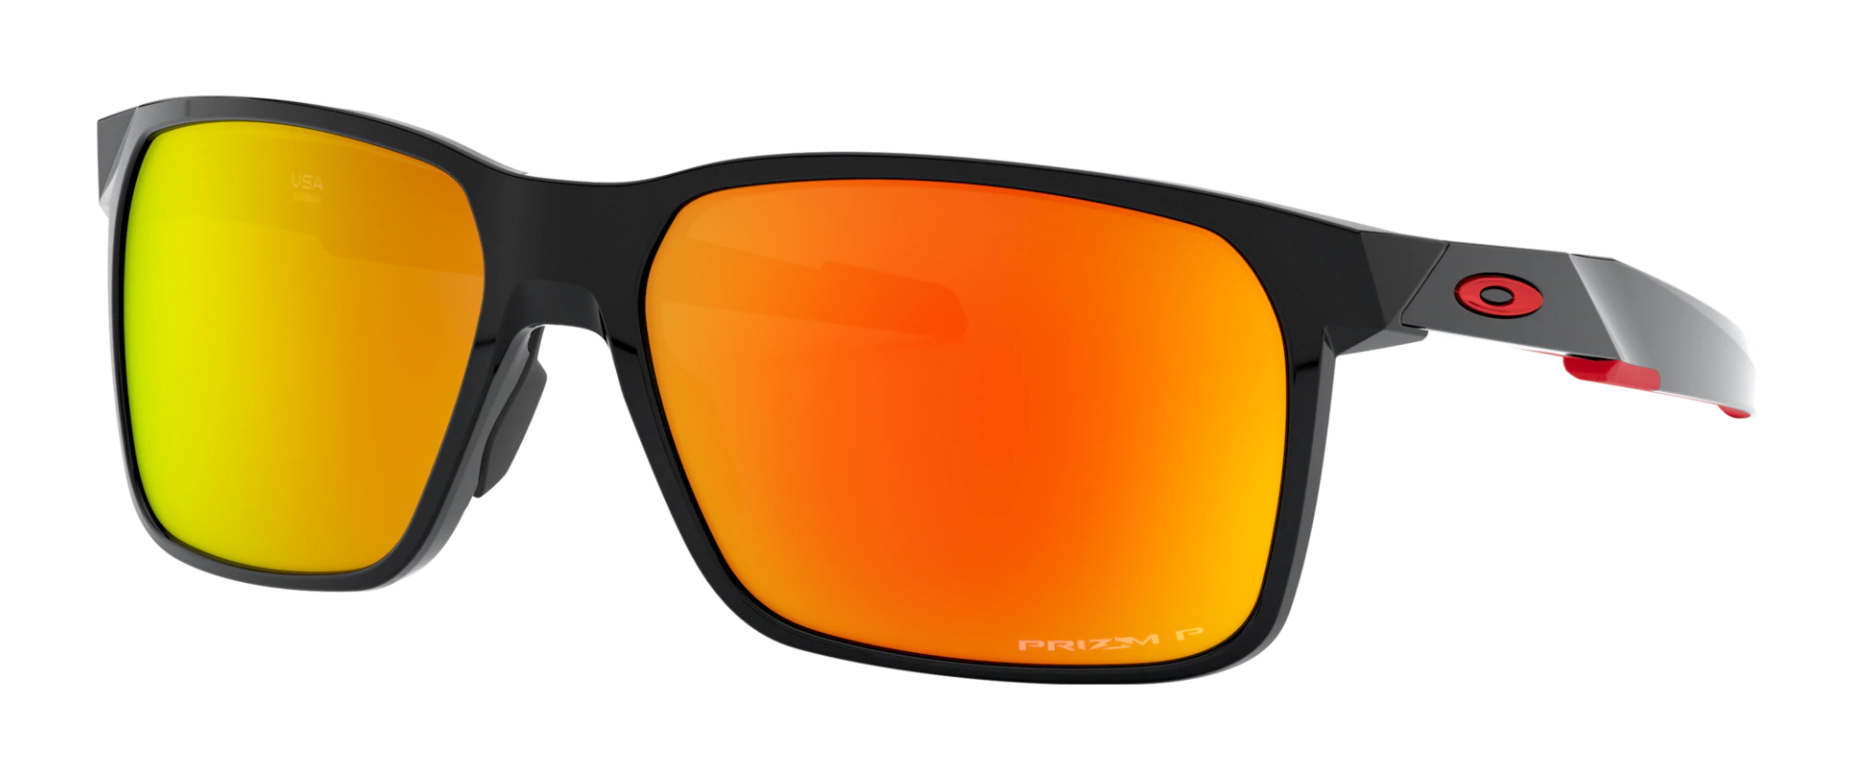 Discount 80% OFF Oakley Sunglasses Outlet Online For Sale